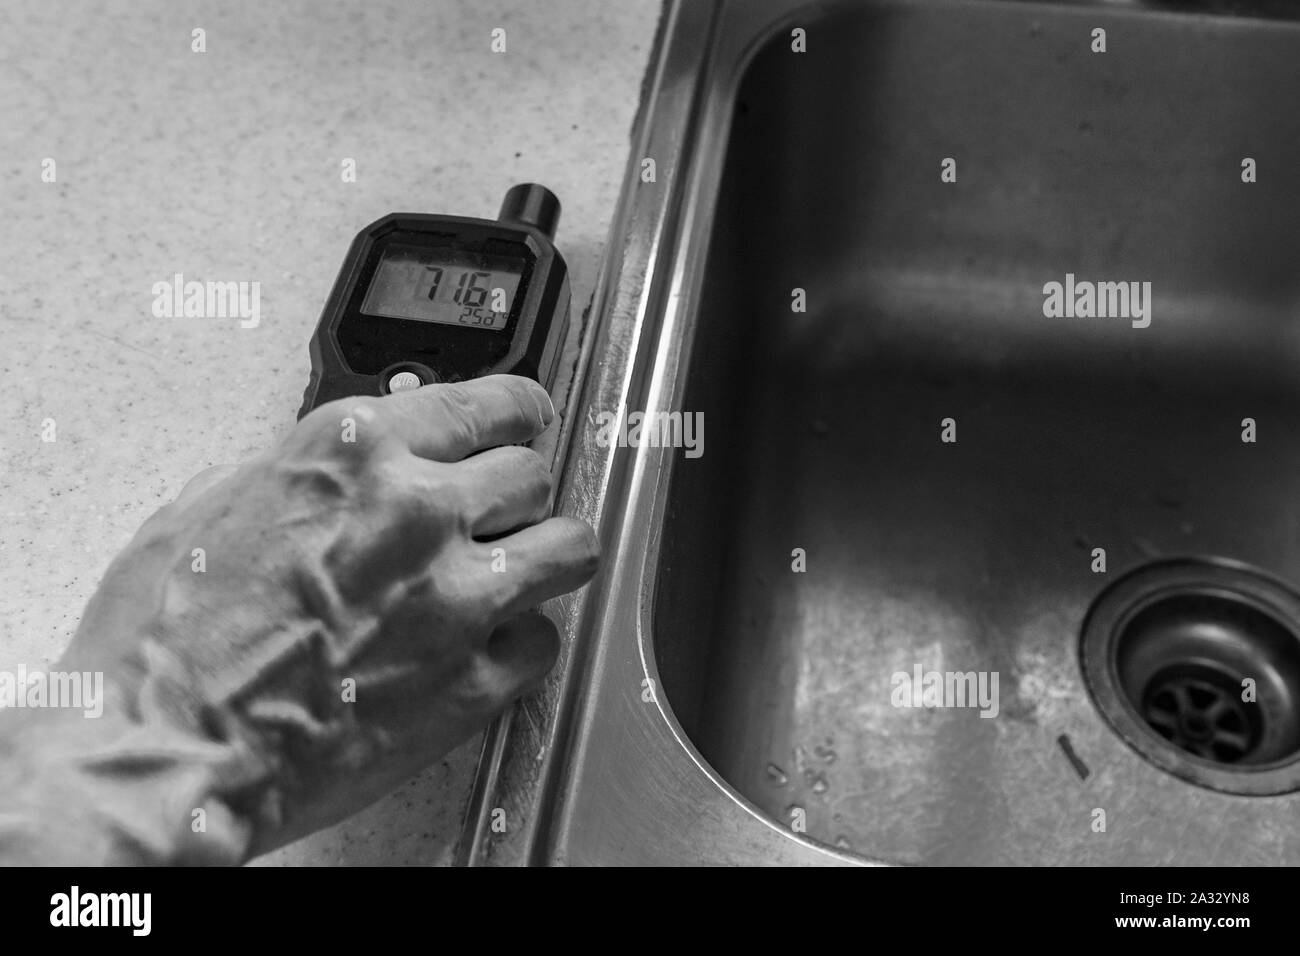 A close up and monochrome view on the hand of an indoor environmental quality assessor, taking readings from an electronic meter by a kitchen sink. Stock Photo